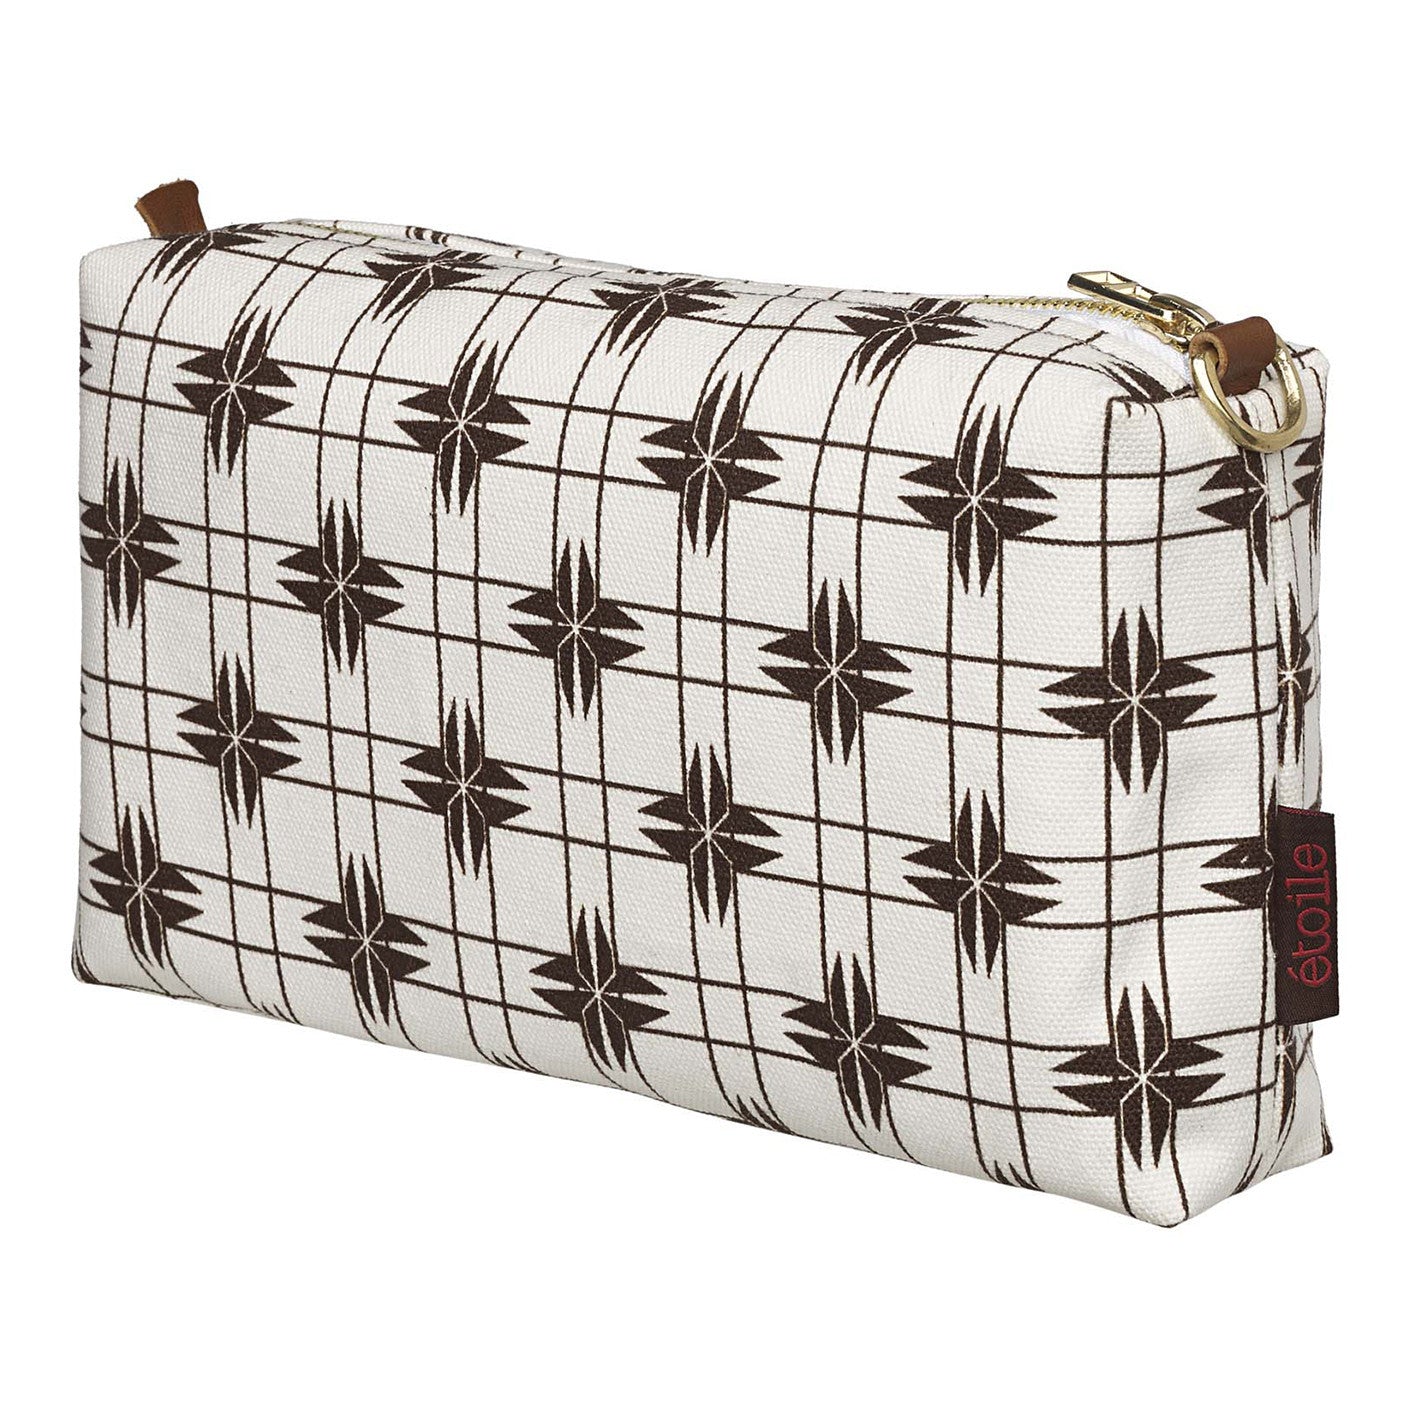 Pueblo Geometric Pattern Canvas Wash or toiletry travel Bag - Chocolate Brown - Perfect for all your cosmetic or beauty needs while travelling Ships from Canada (USA)